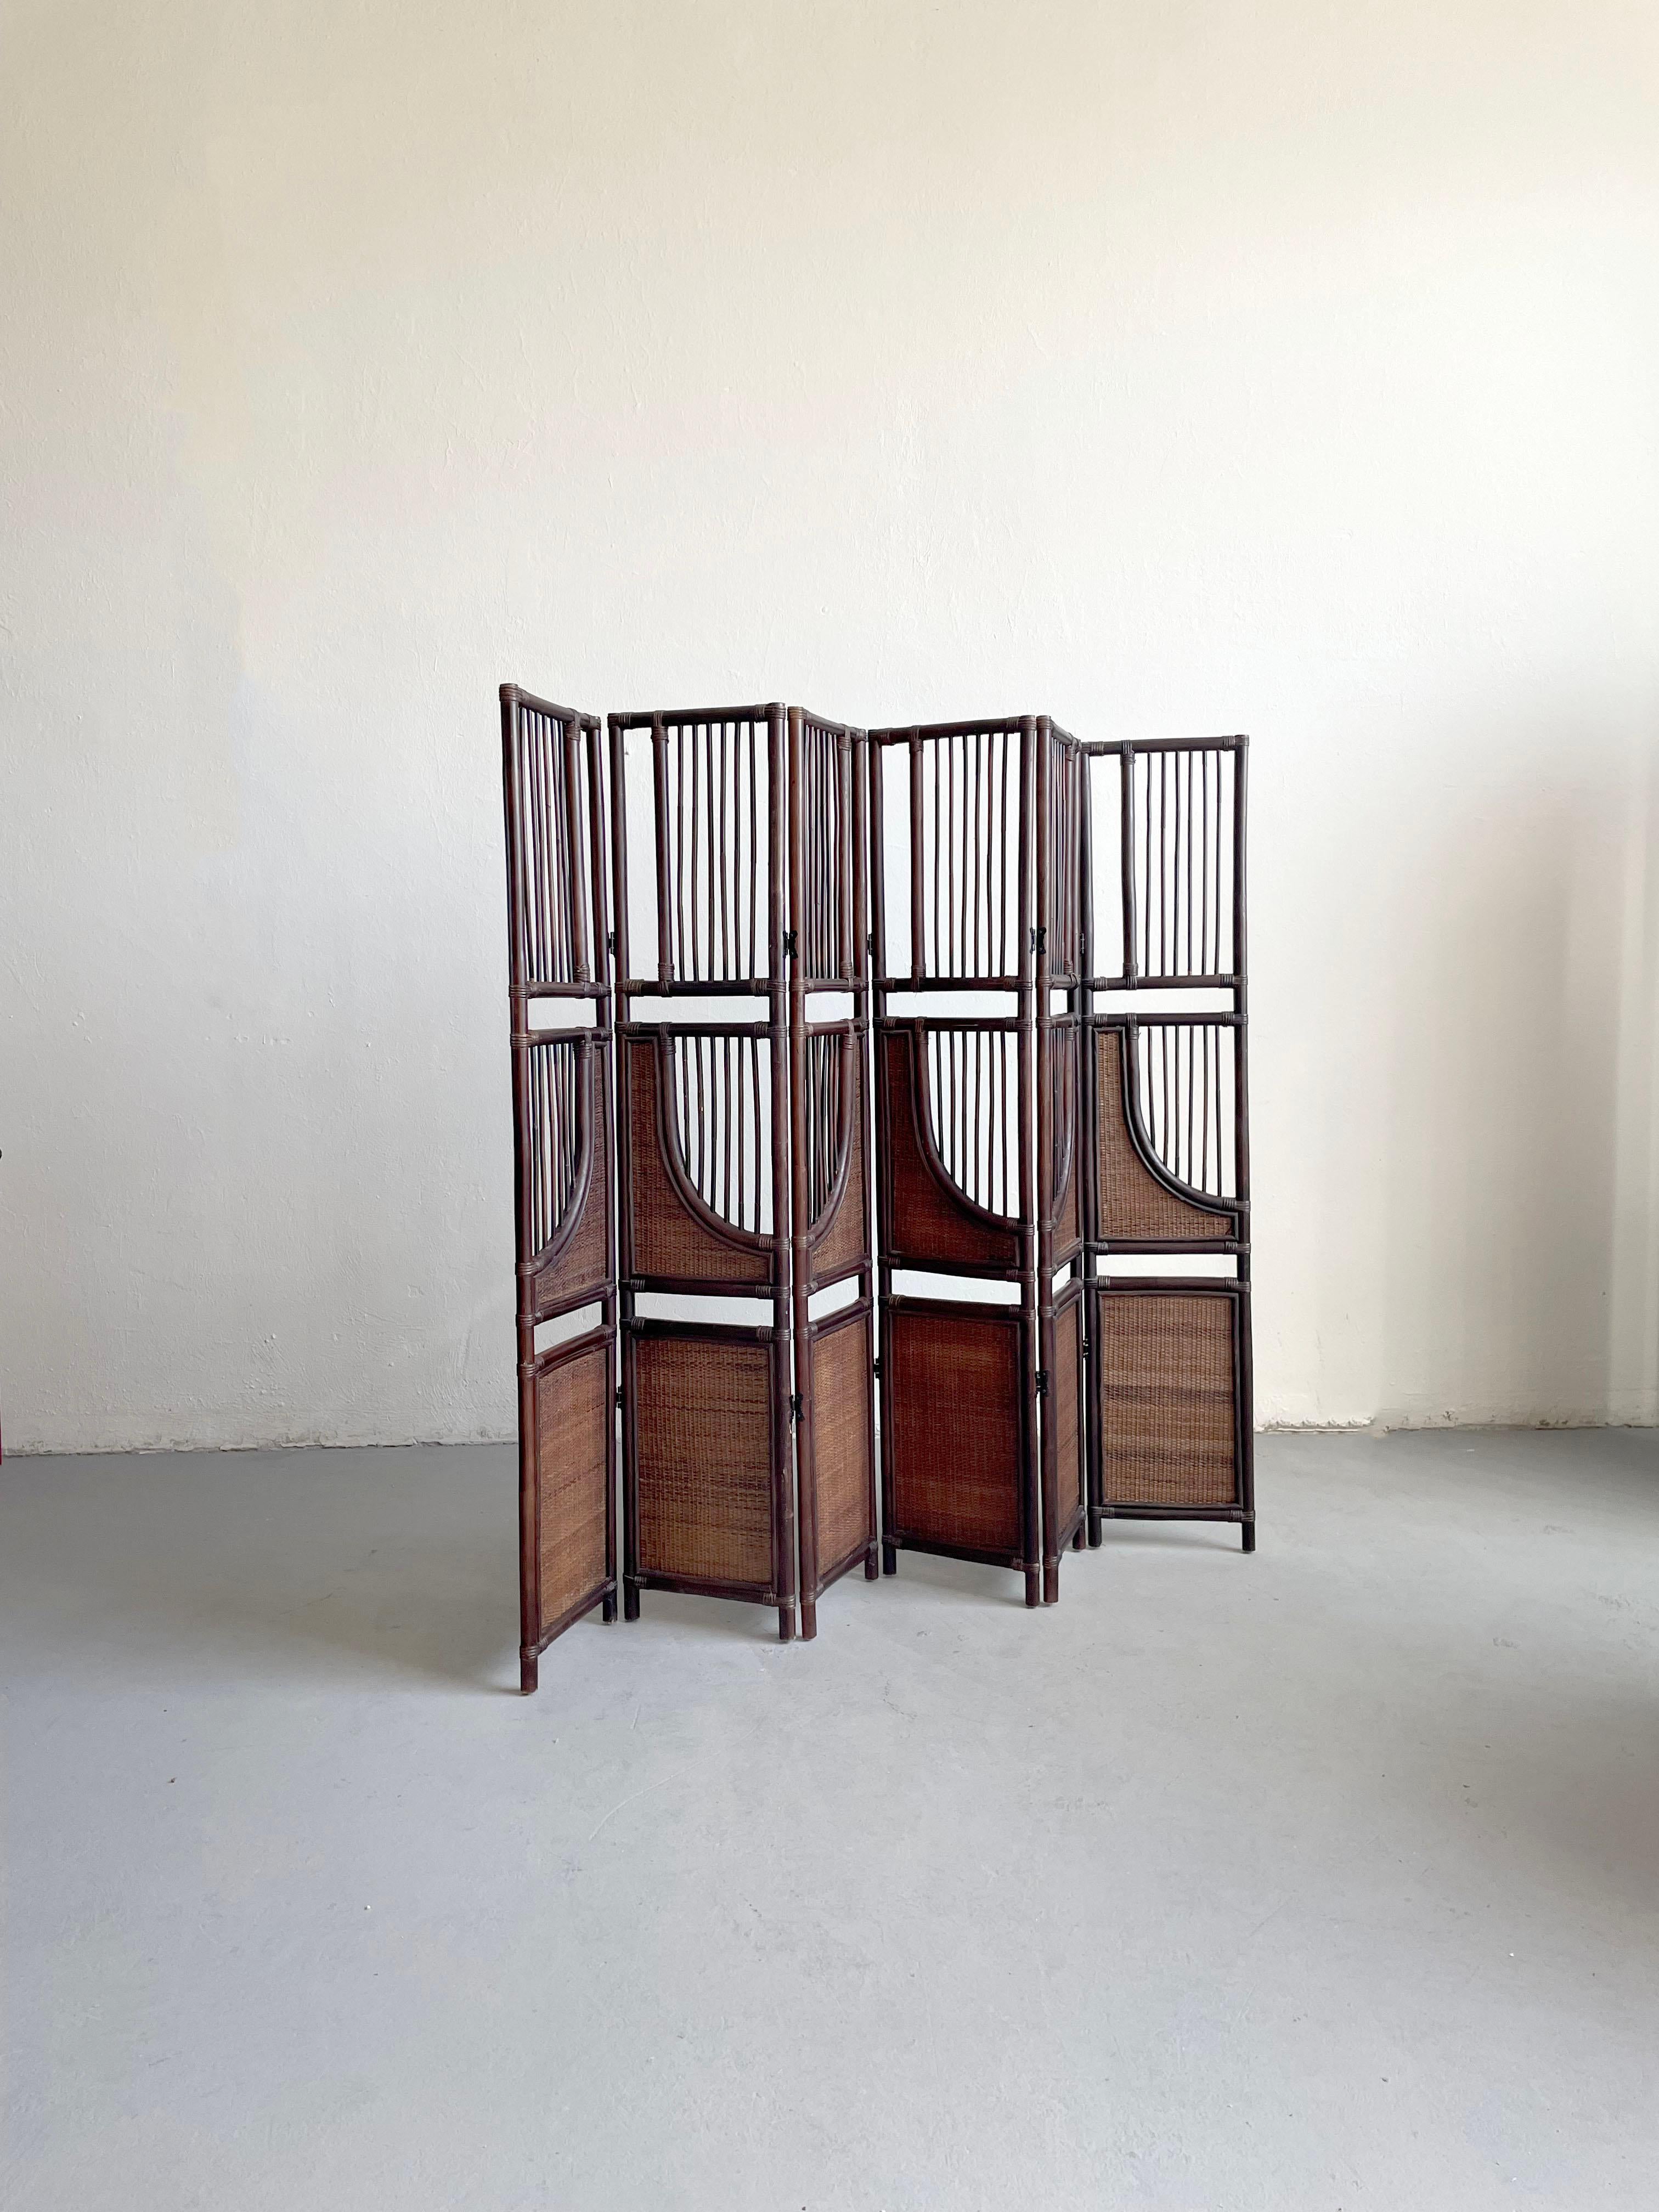 Mid-Century Modern tall six wall-panel solid bamboo and rattan room divider, screen, or paravent in dark brown finish.

Manufactured in the 1970s/1980s

Remains in a very good vintage condition, with some small traces of age and use-related